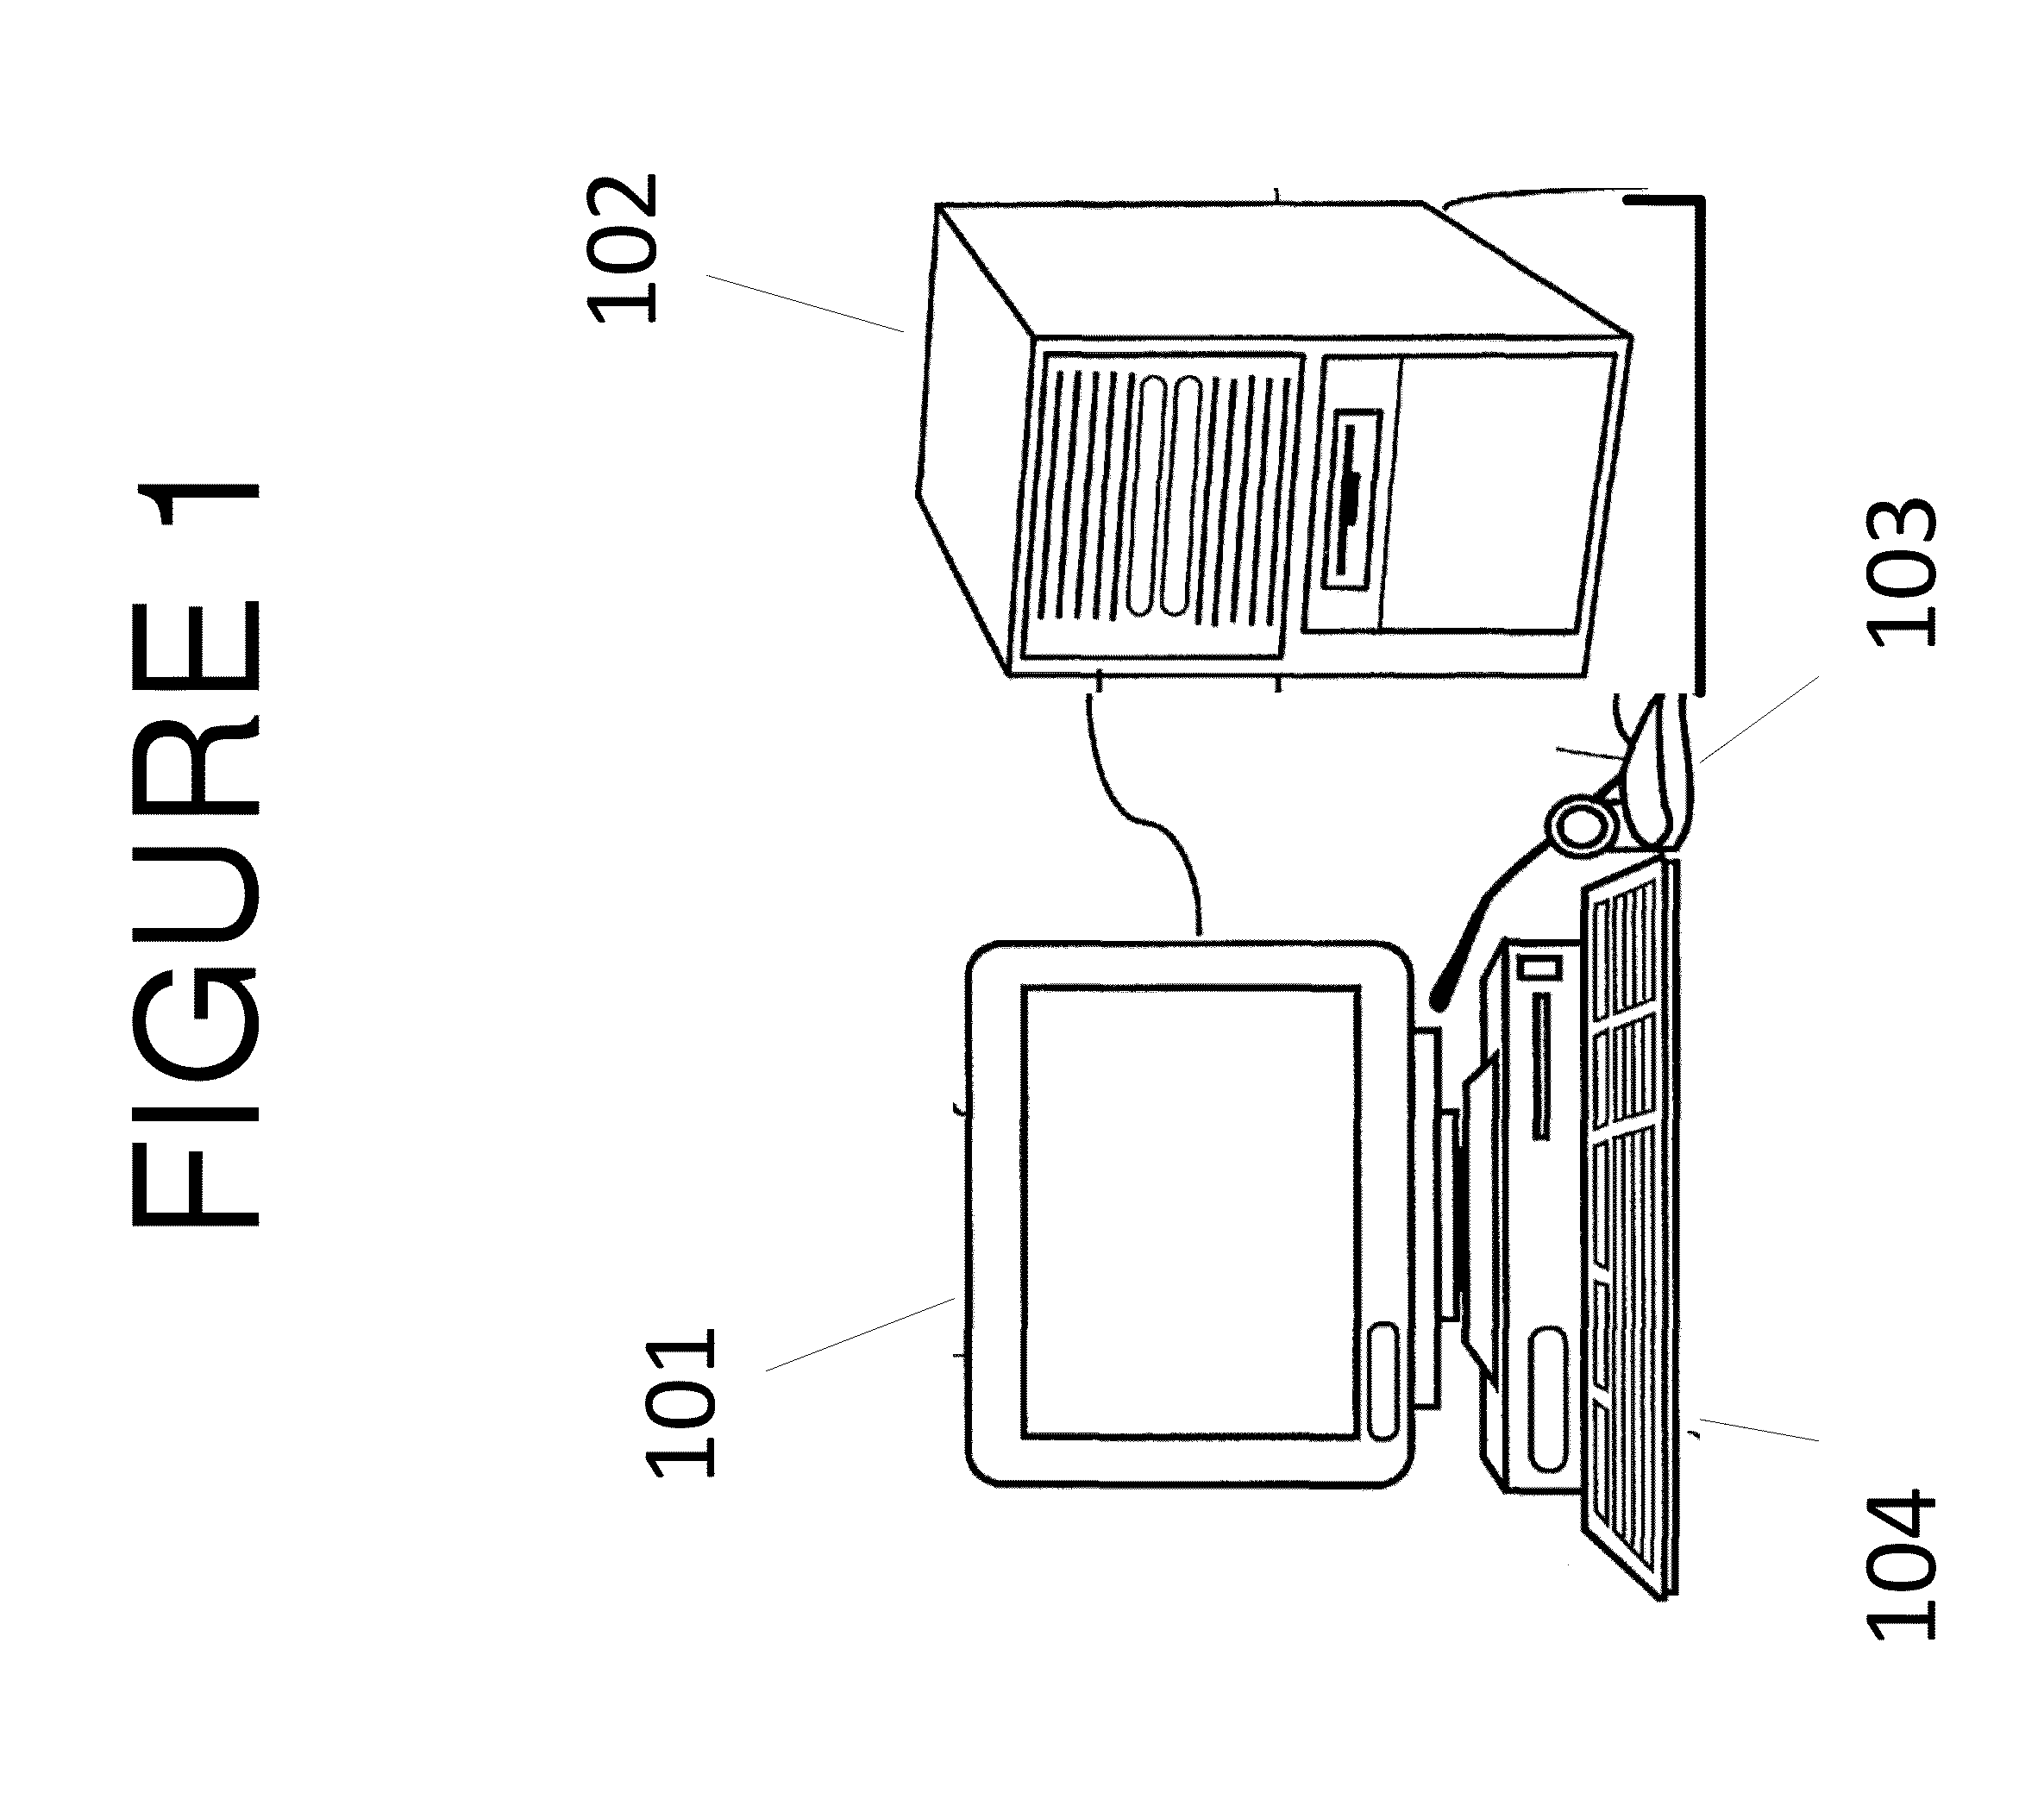 System and Method for Interactive Identification and Matching of Funding and/or Advisory Seekers and Funding and/or Advisory Providers